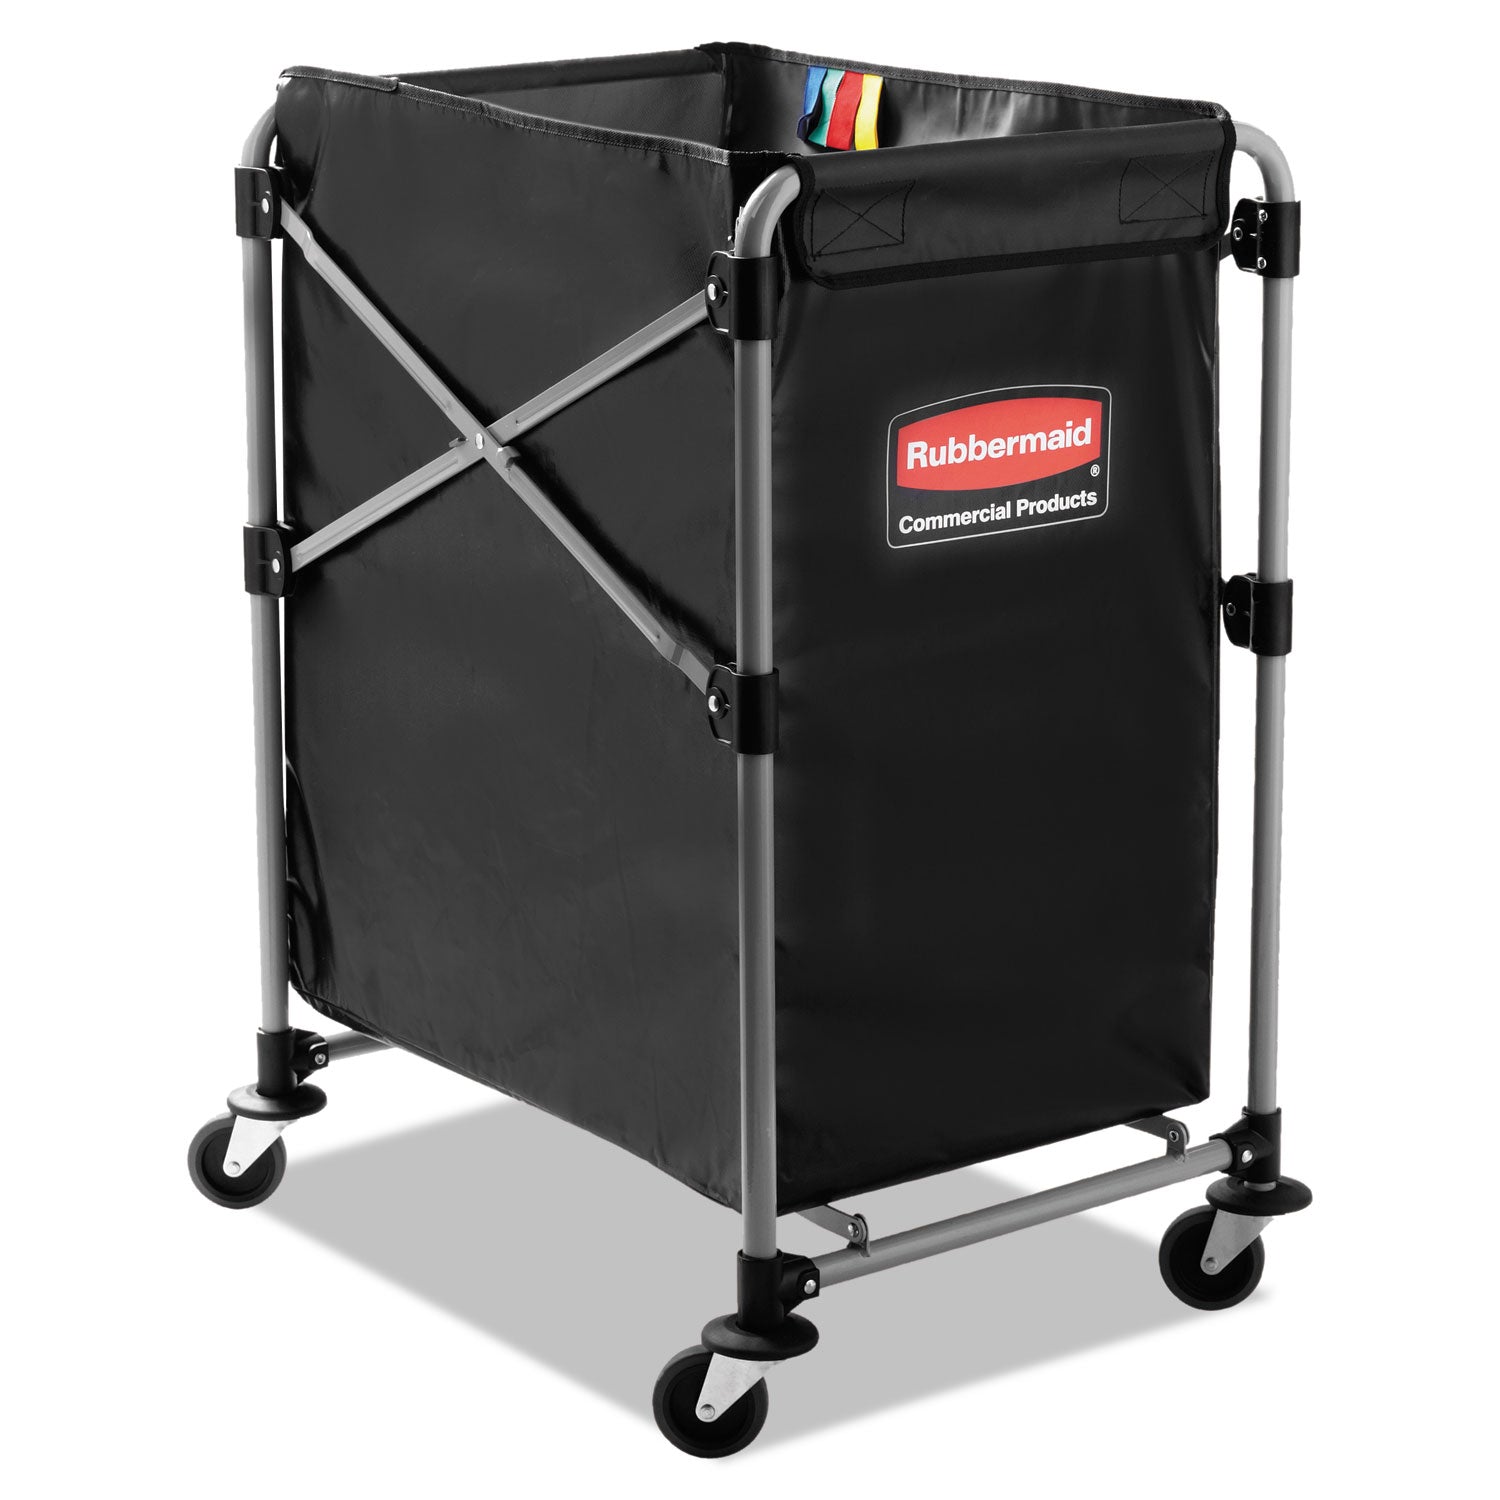 One-Compartment Collapsible X-Cart, Synthetic Fabric, 4.98 cu ft Bin, 20.33" x 24.1" x 34", Black/Silver - 